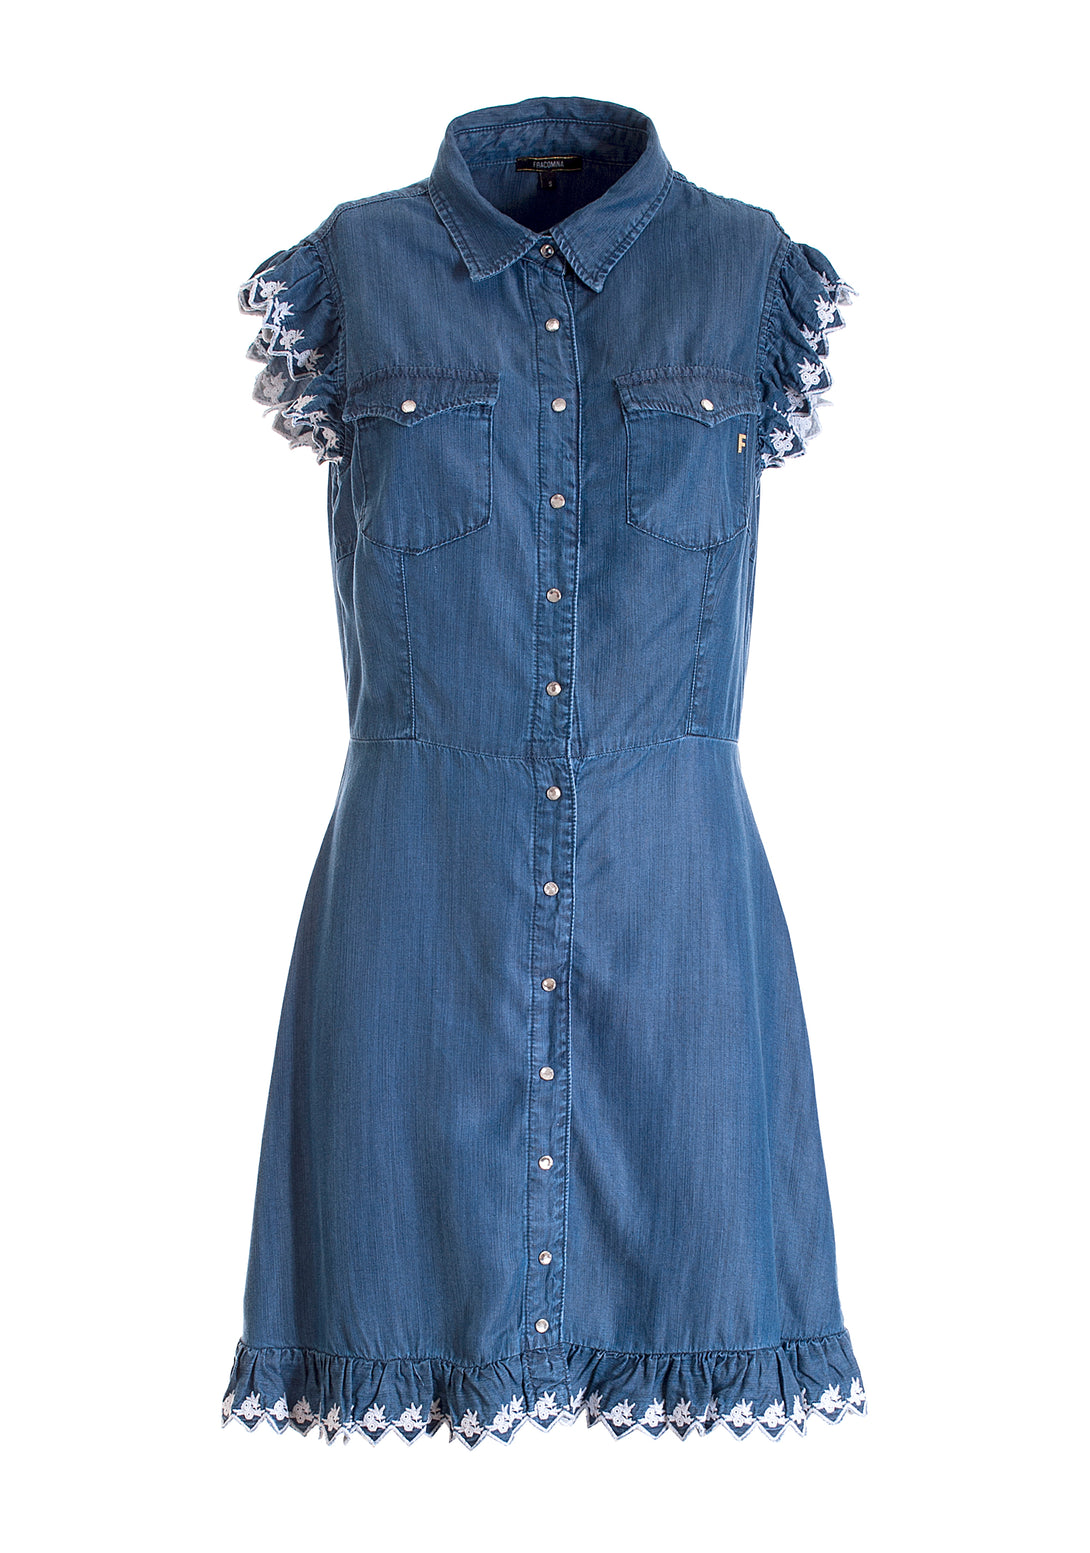 Chemisier dress, short, made in chambray fabric